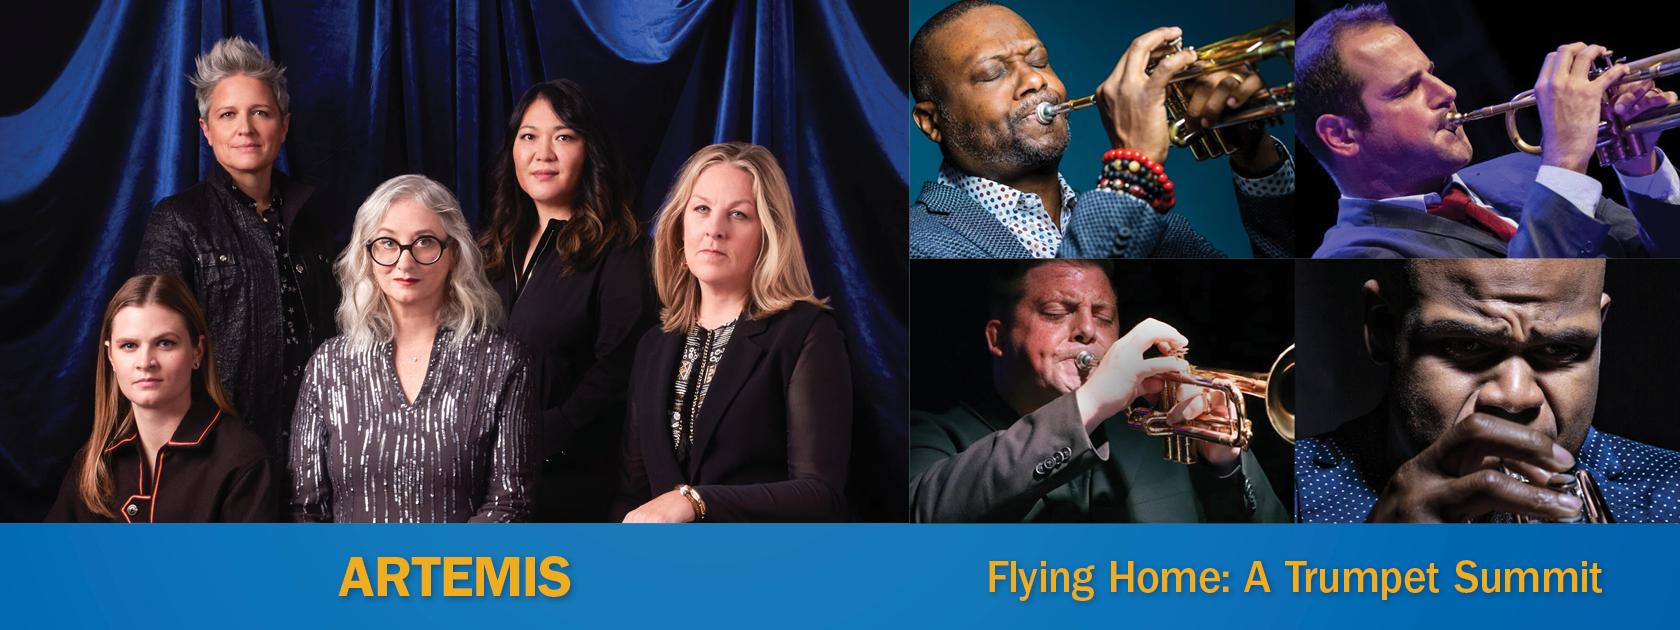 Artemis and Flying Home: A Trumpet Summit